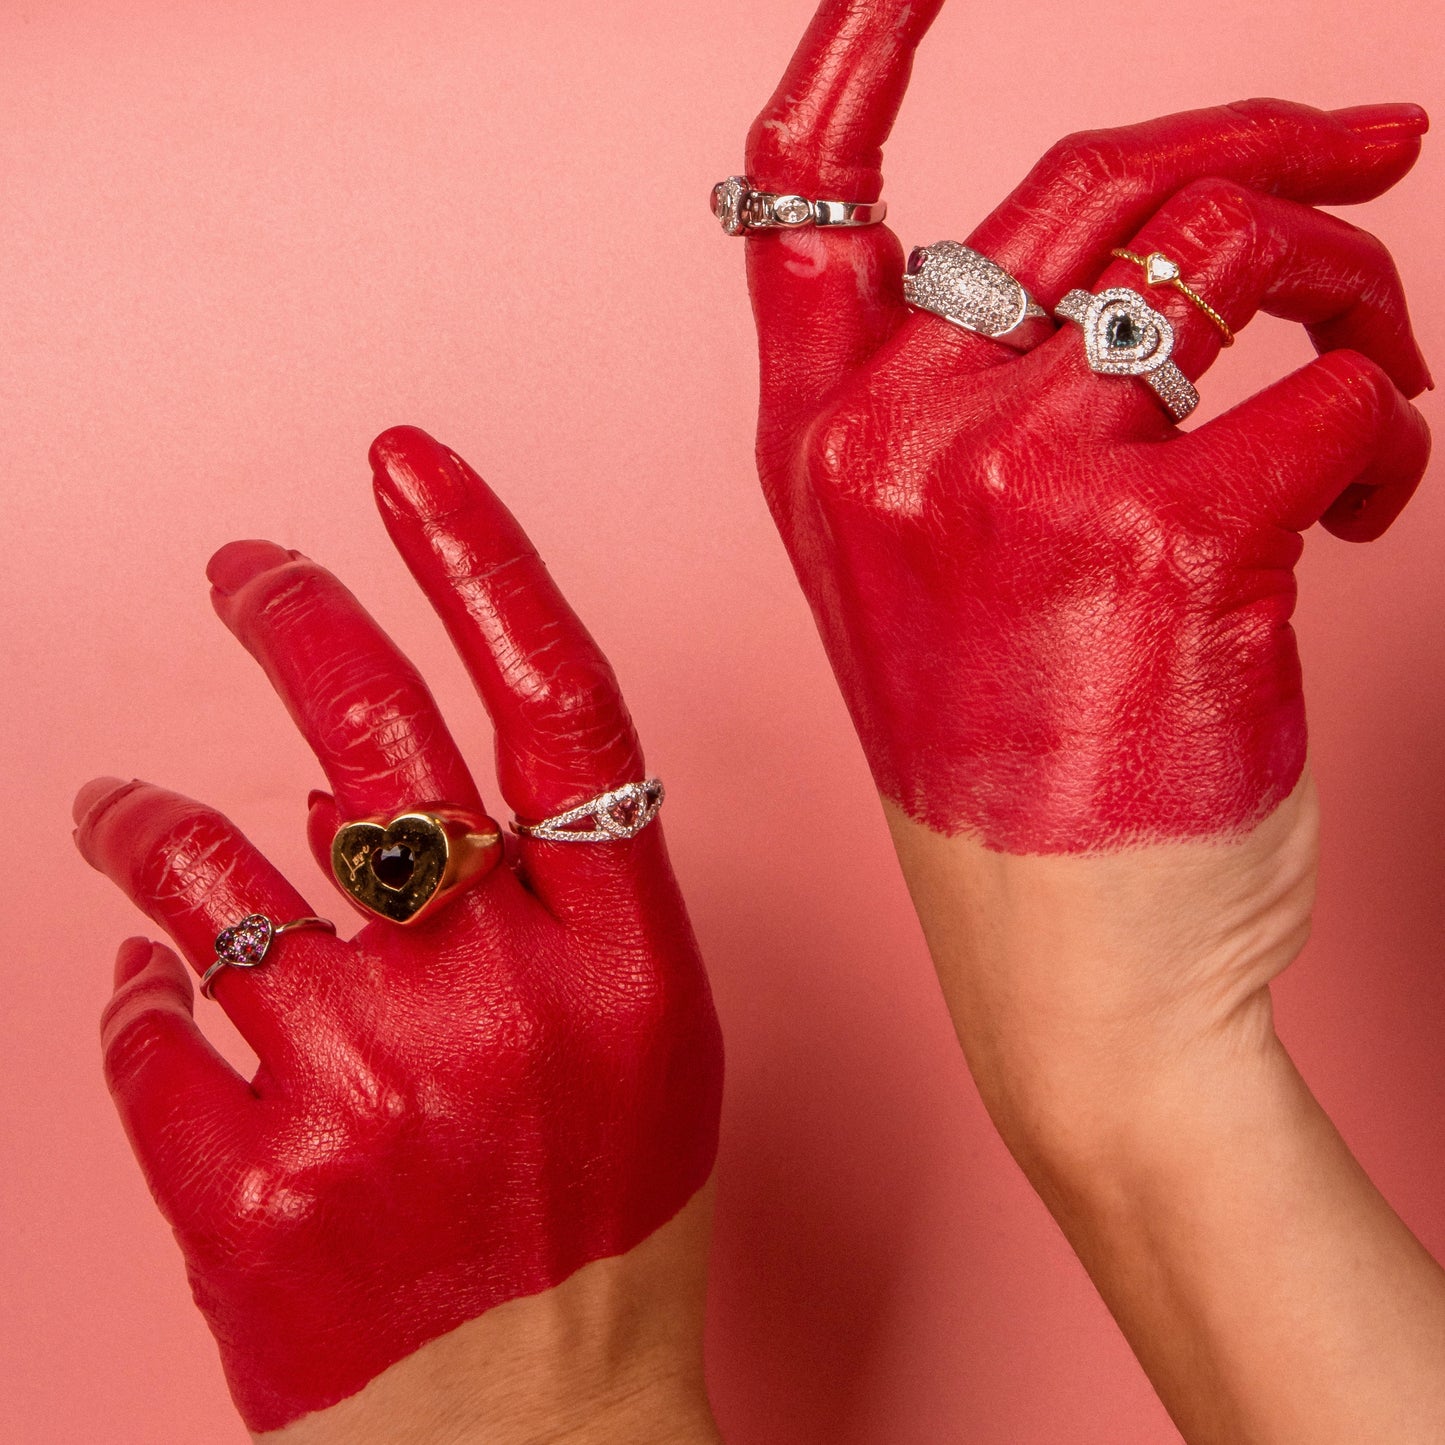 Hand with red paint wearing multiple rings